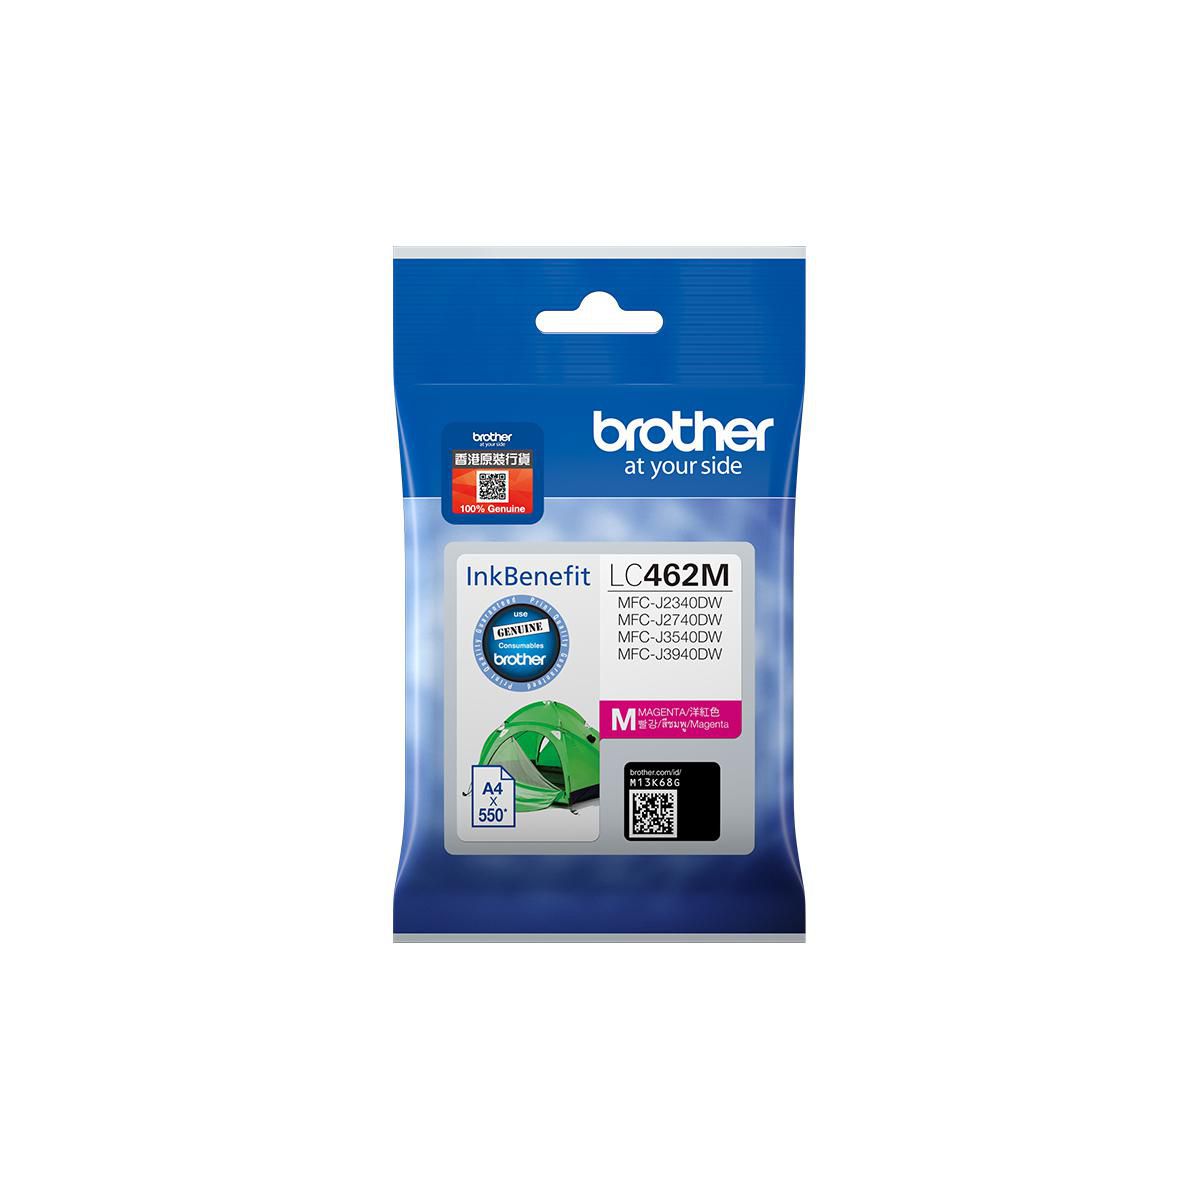 W128601066 Brother LC462M ink cartridge 